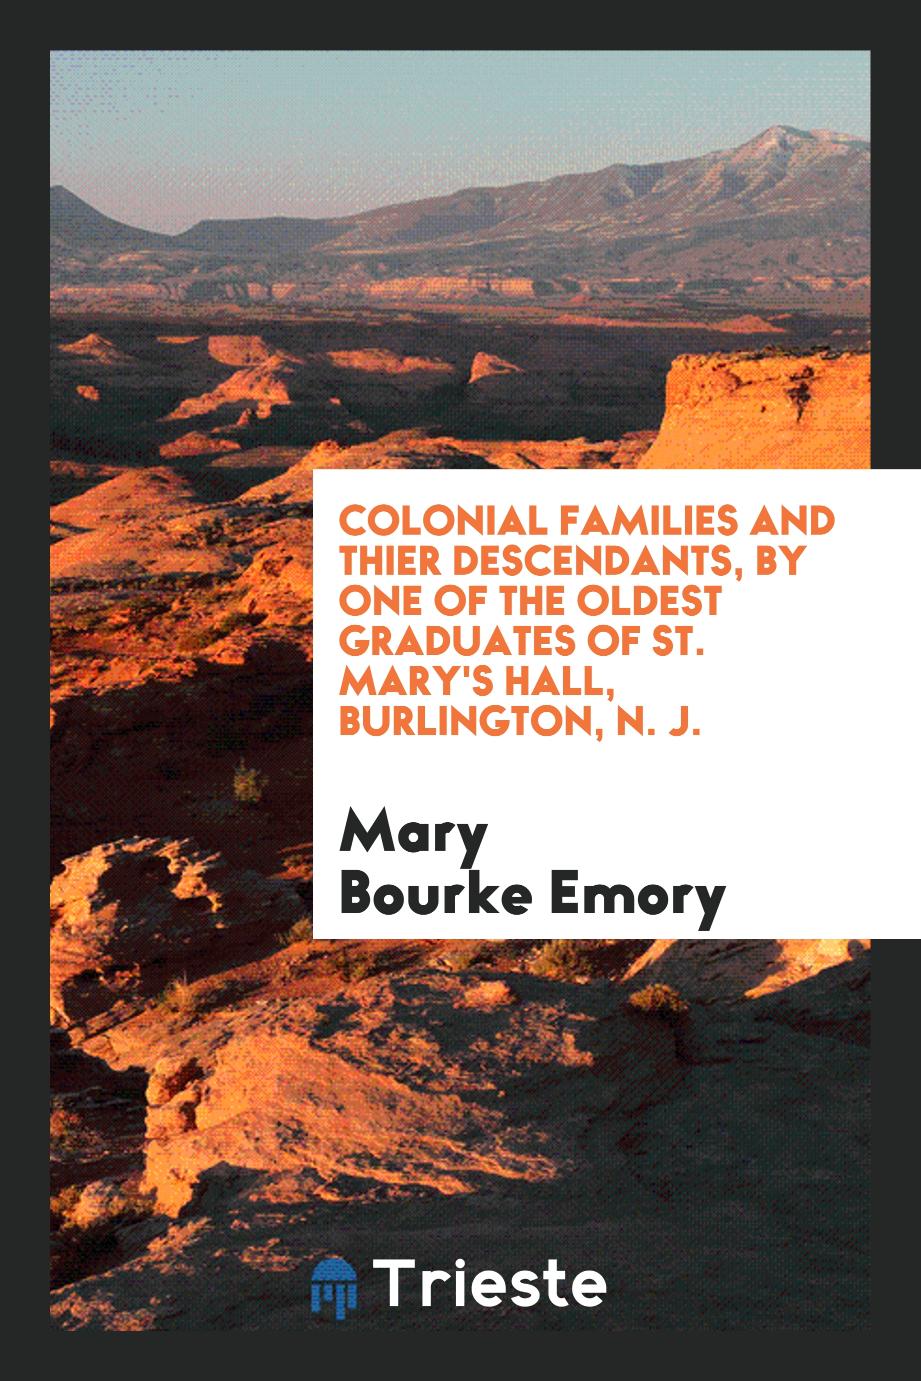 Colonial Families and Thier Descendants, by One of the Oldest Graduates of St. Mary's Hall, Burlington, N. J.